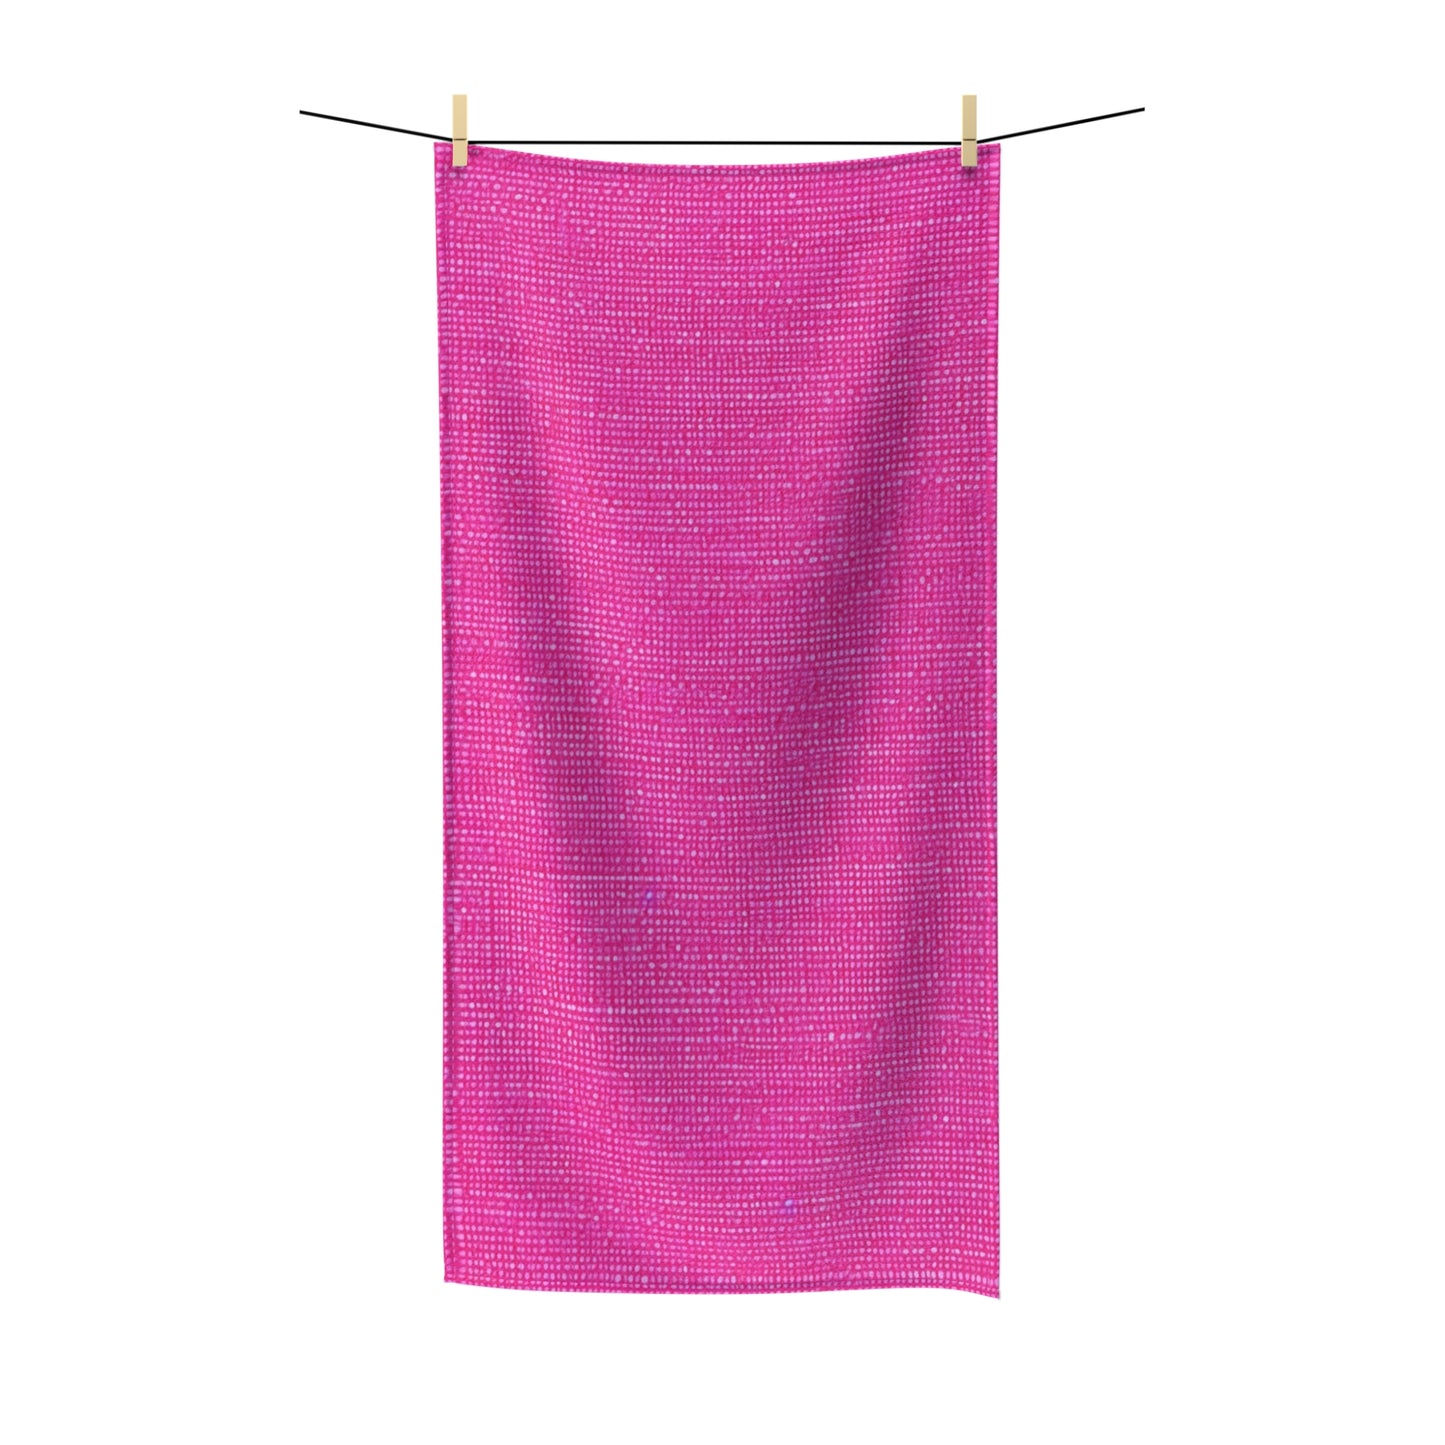 Hot Neon Pink Doll Like: Denim-Inspired, Bold & Bright Fabric - Polycotton Towel